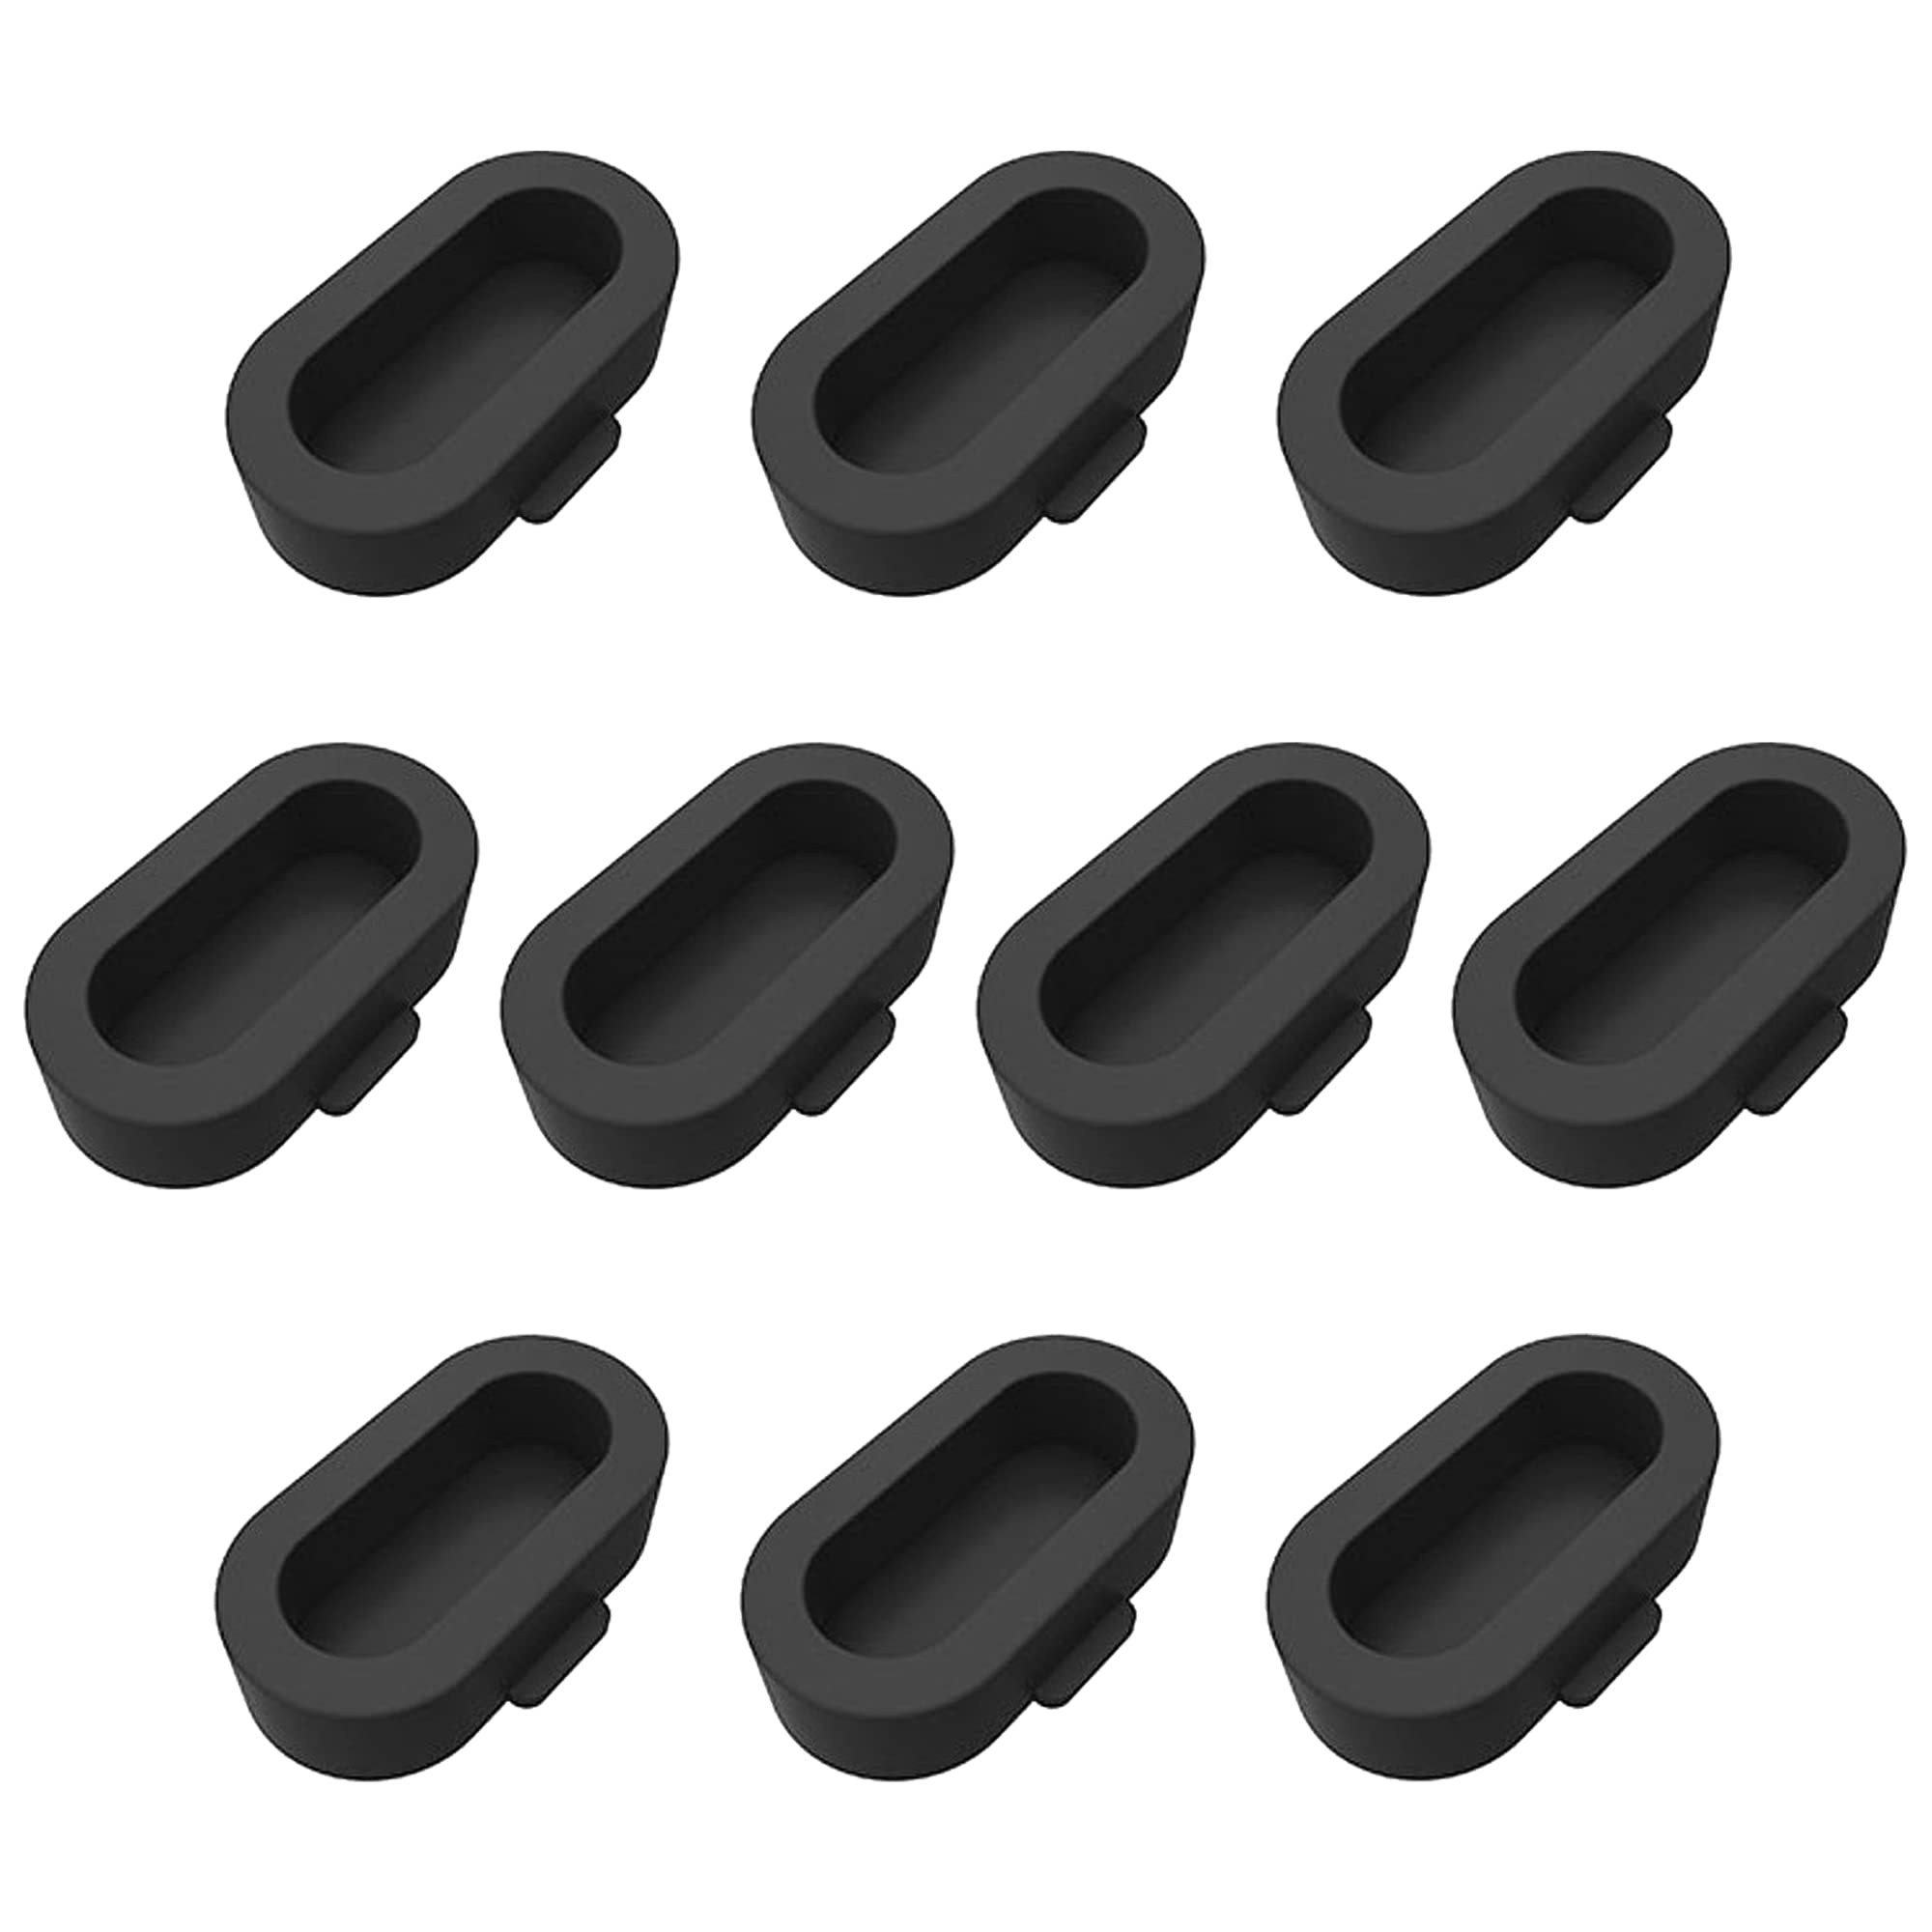 AWINNER 10 Pack Dust Plug Compatible for Garmin Watch Charger Port Protector (Black)